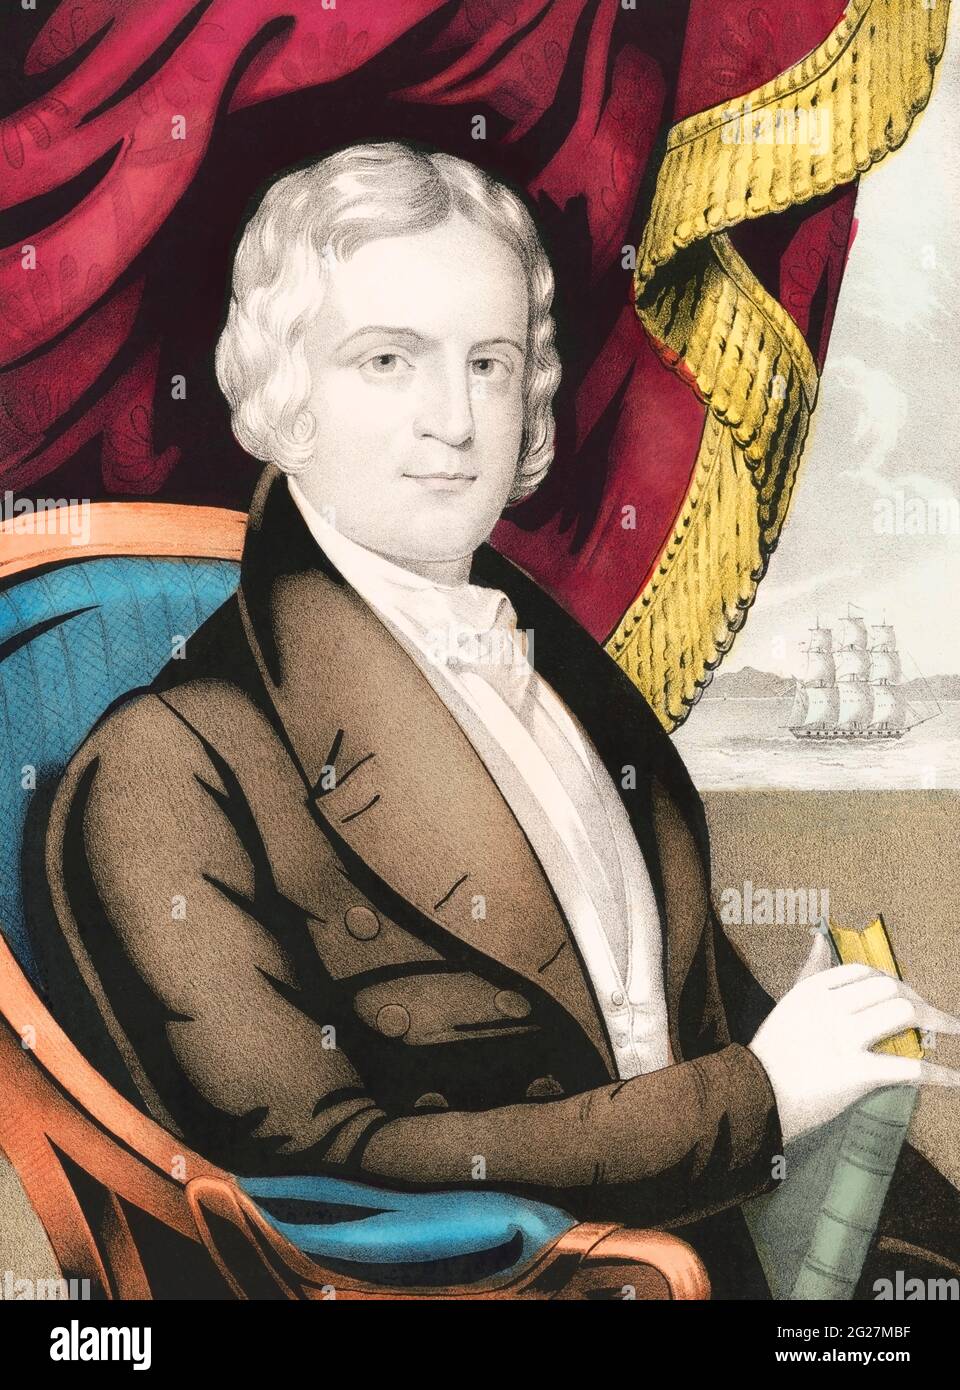 George M. Dallas, Vice Pesident of the United States from 1845 to 1849. Stock Photo